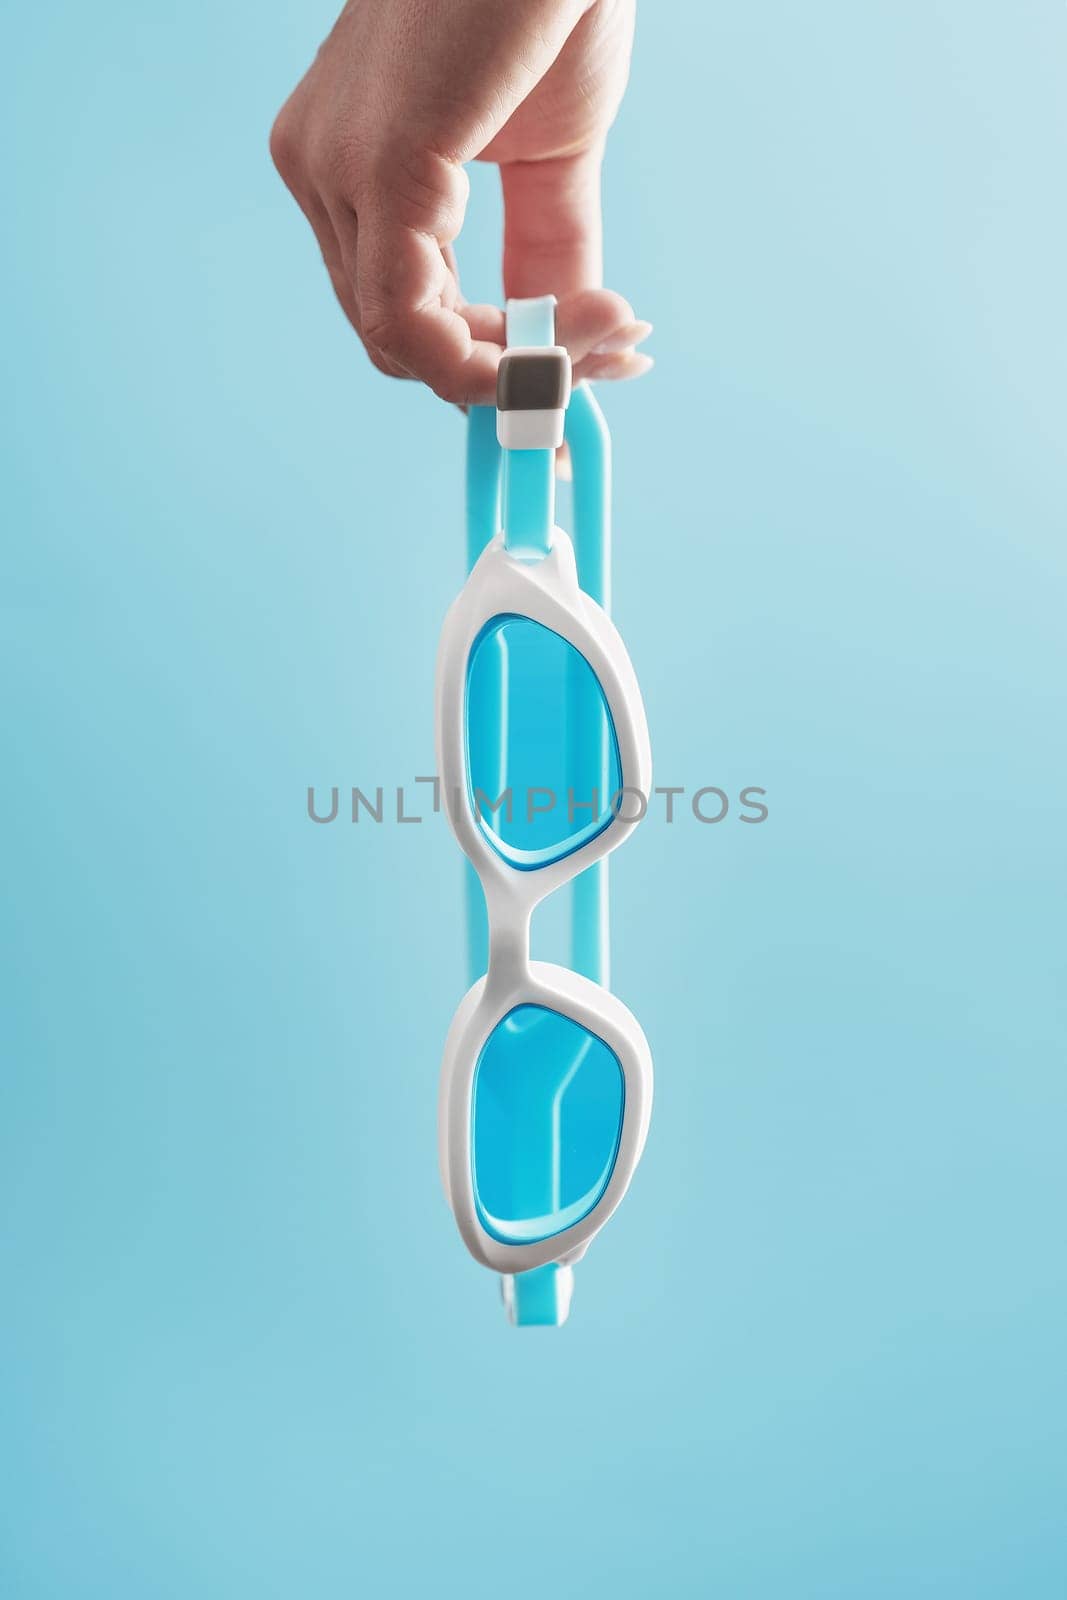 White swimming glasses in hand with a blue lens on a blue background by AlexGrec